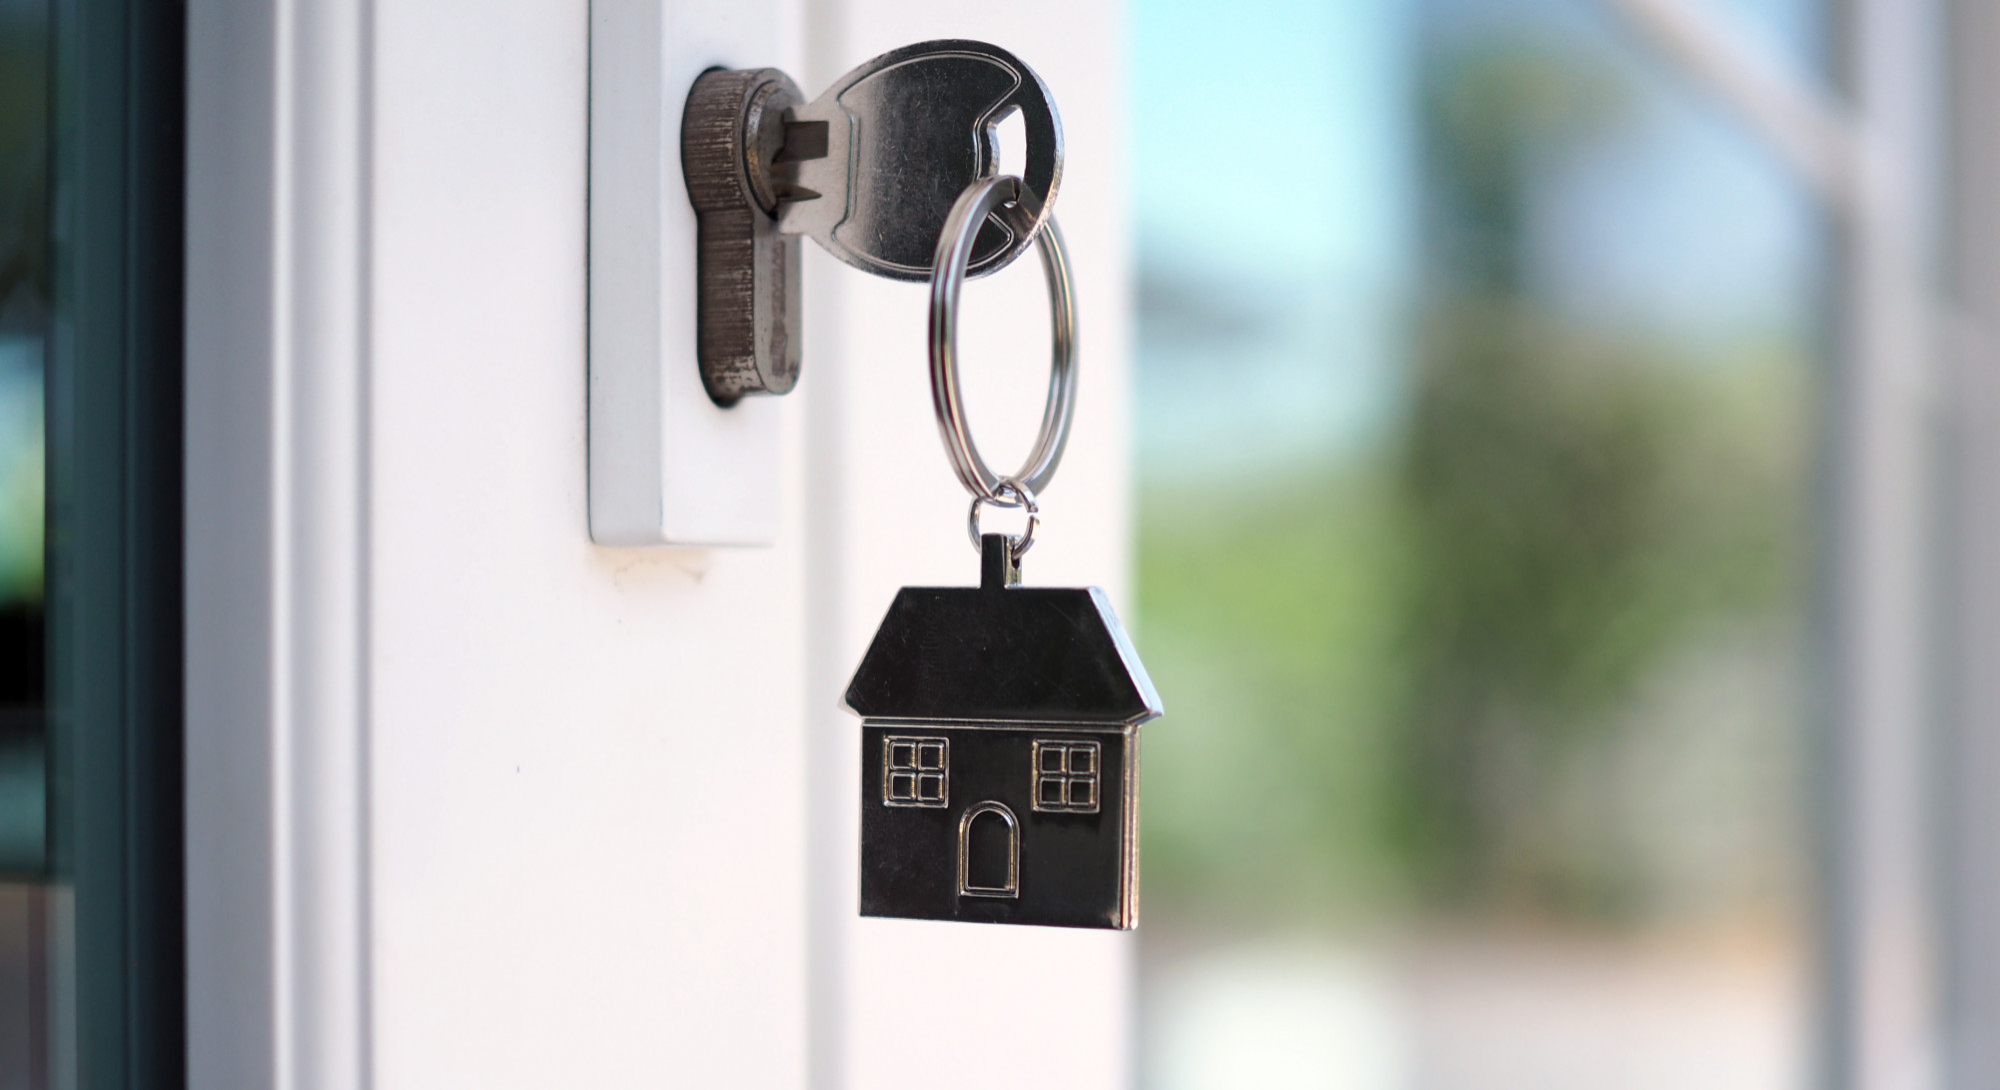 house-key-unlocking-new-house-is-plugged-into-door